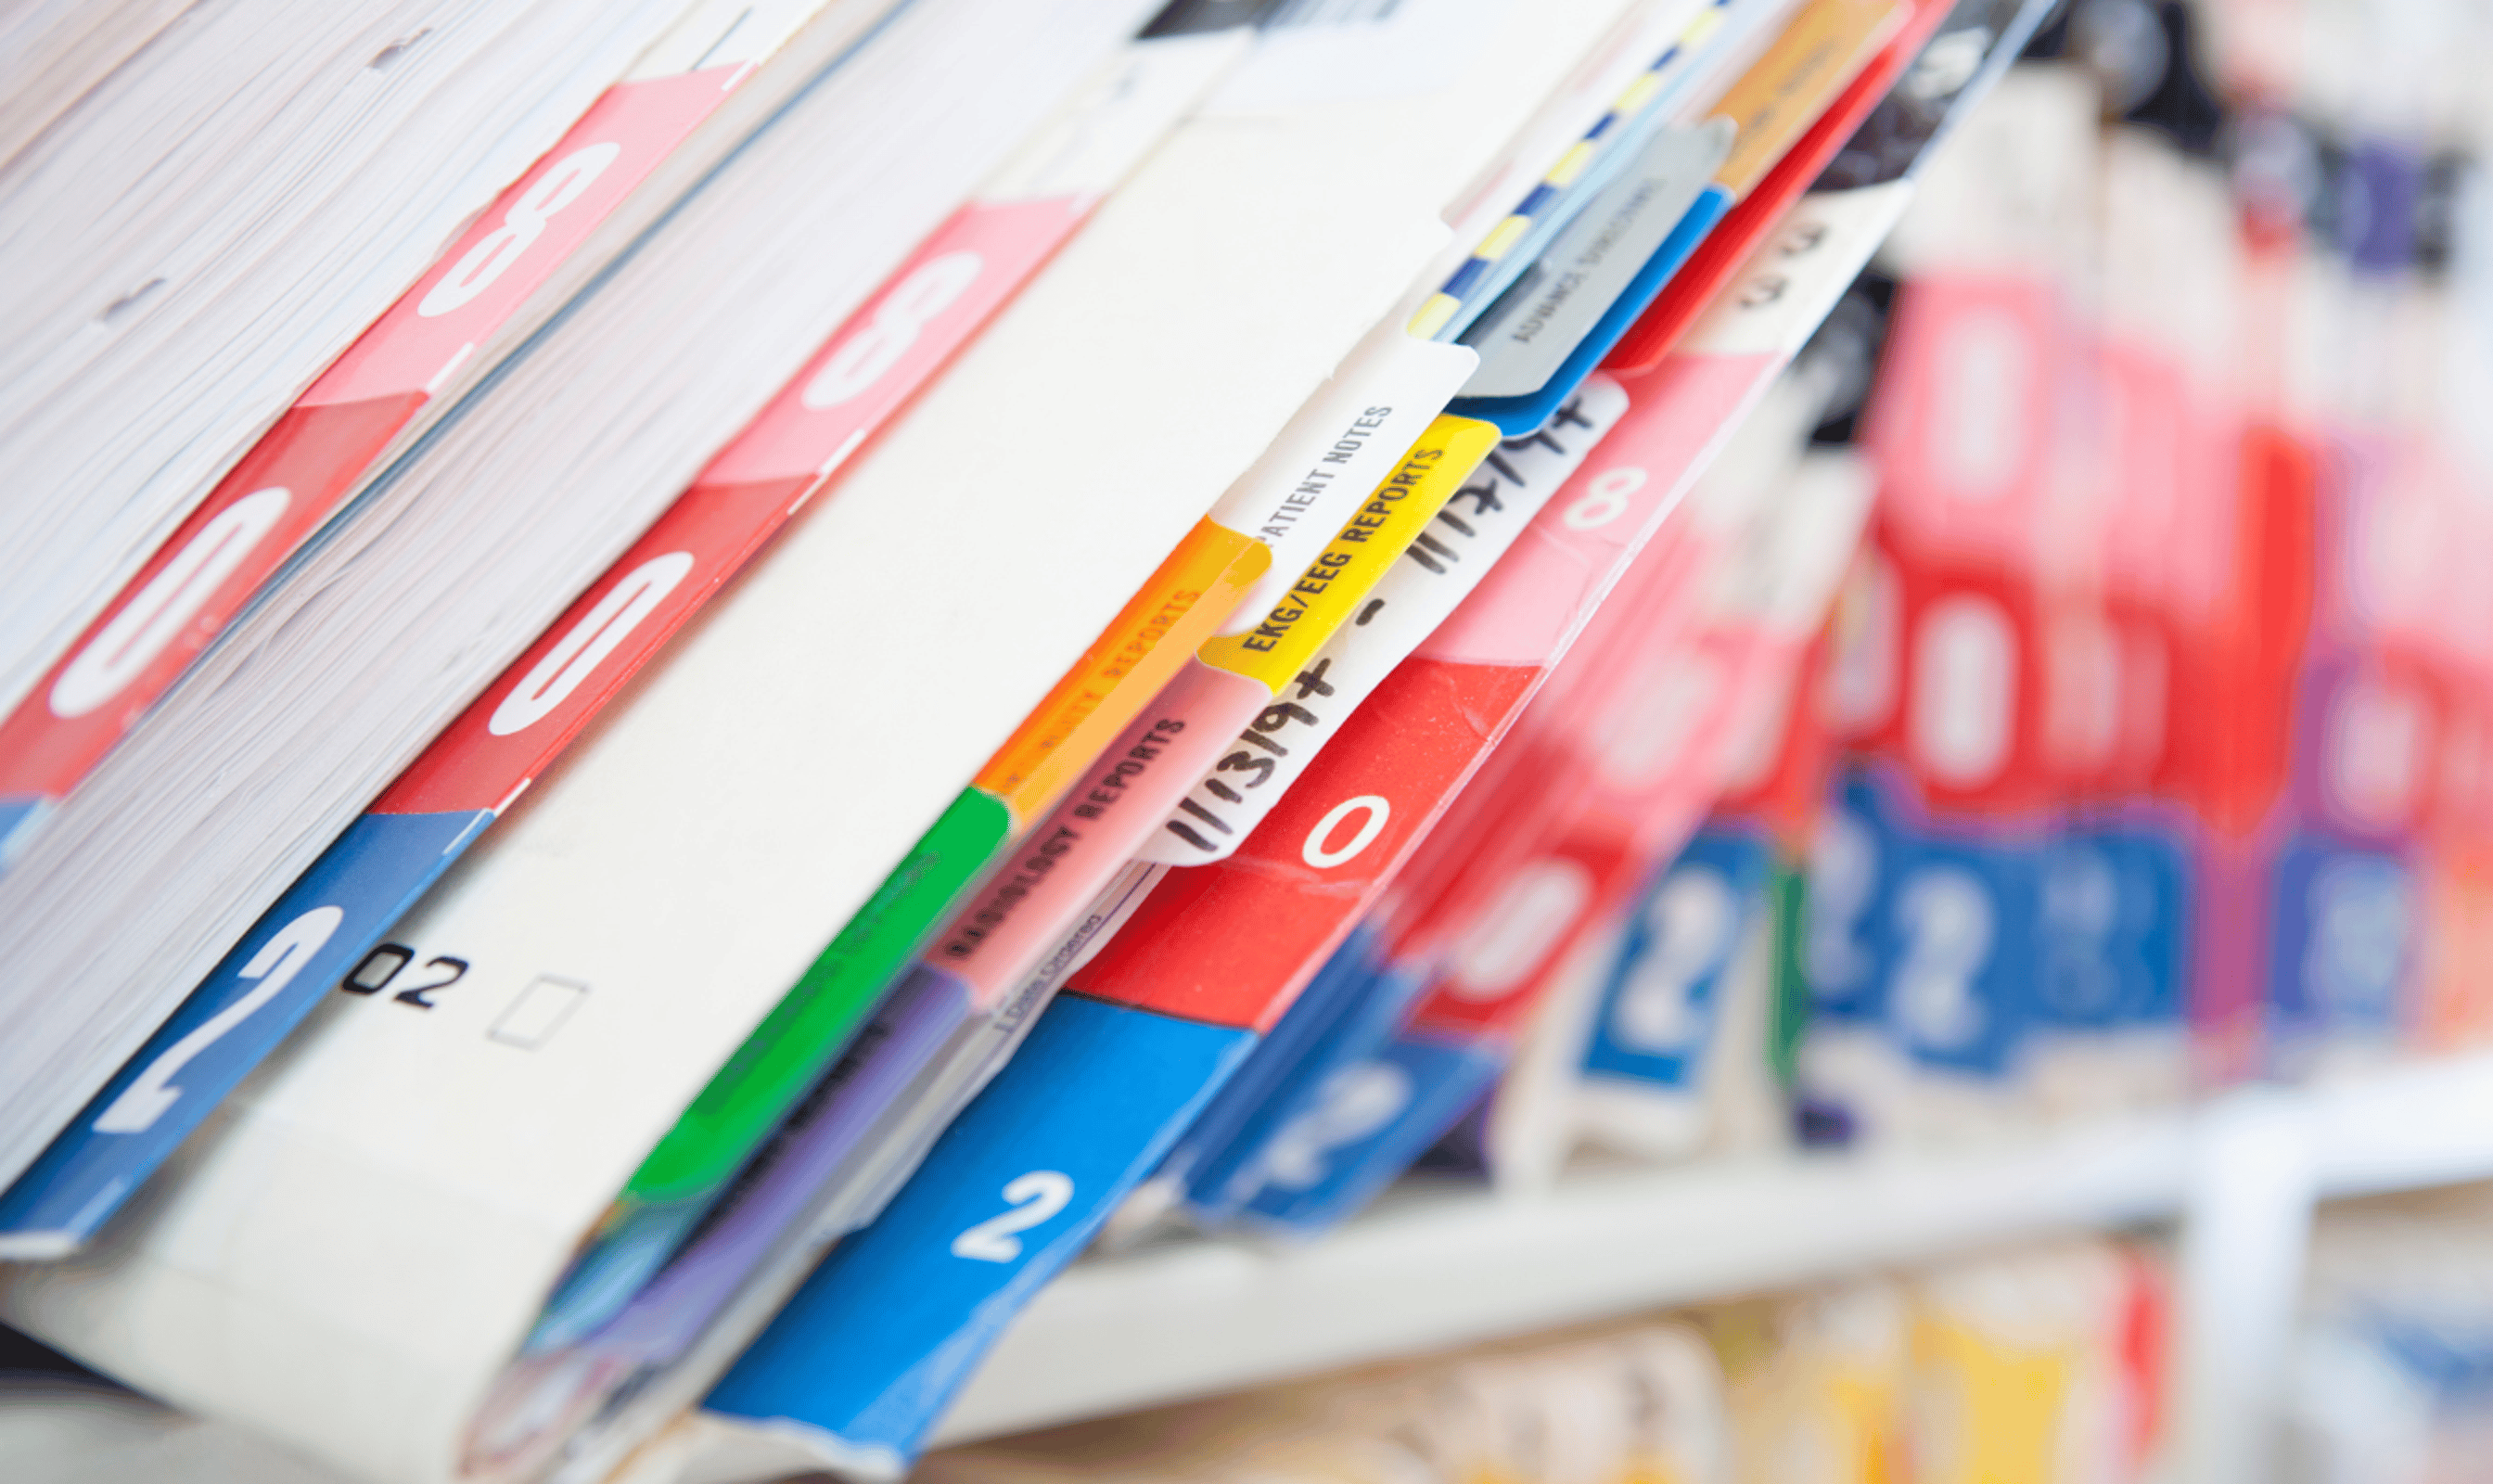 MoneyMonday: De-Clutter: Managing Files and Records